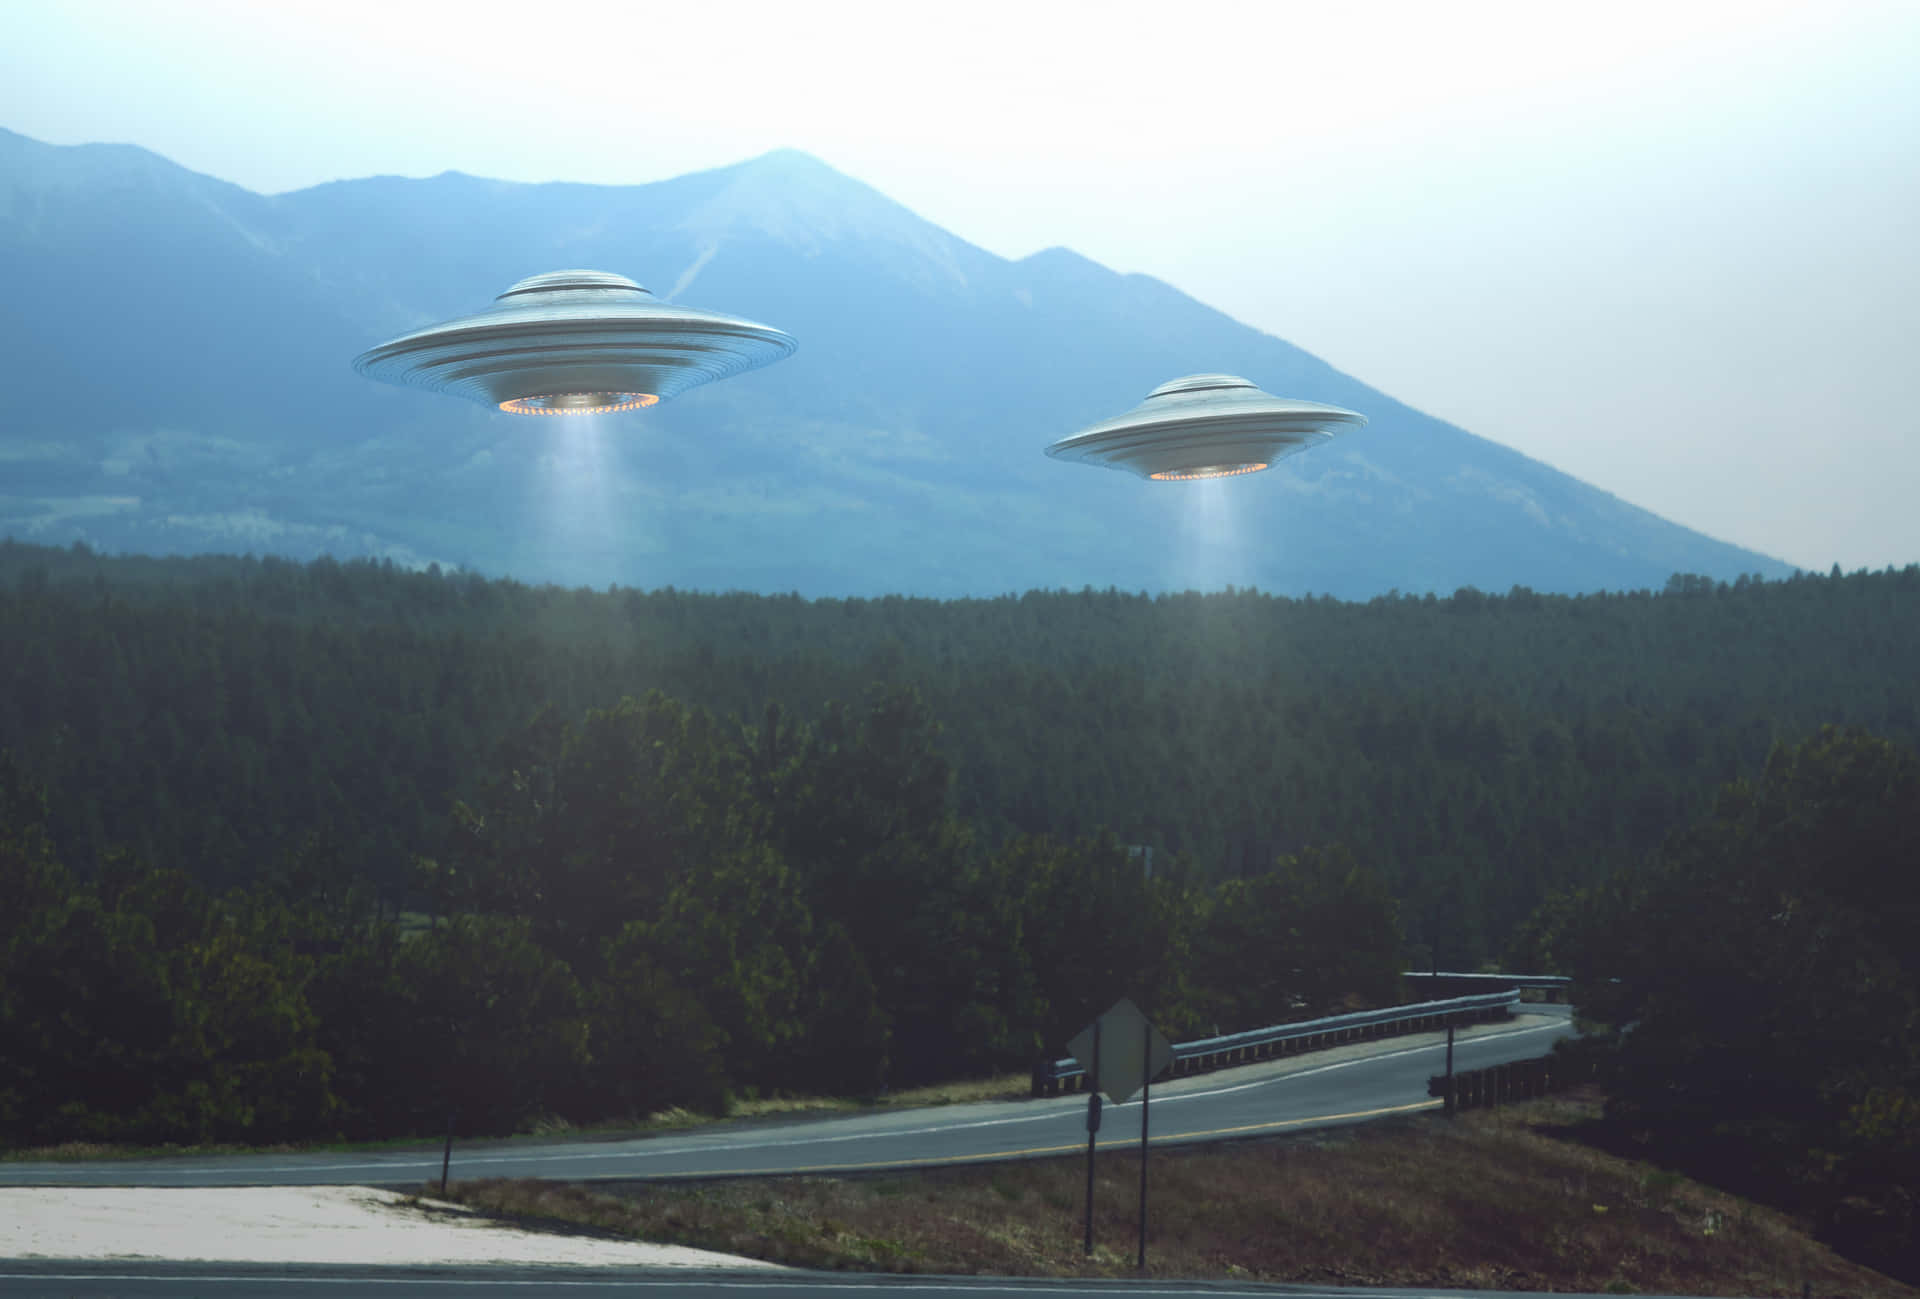 Real UFO Spaceships Above The Road Picture